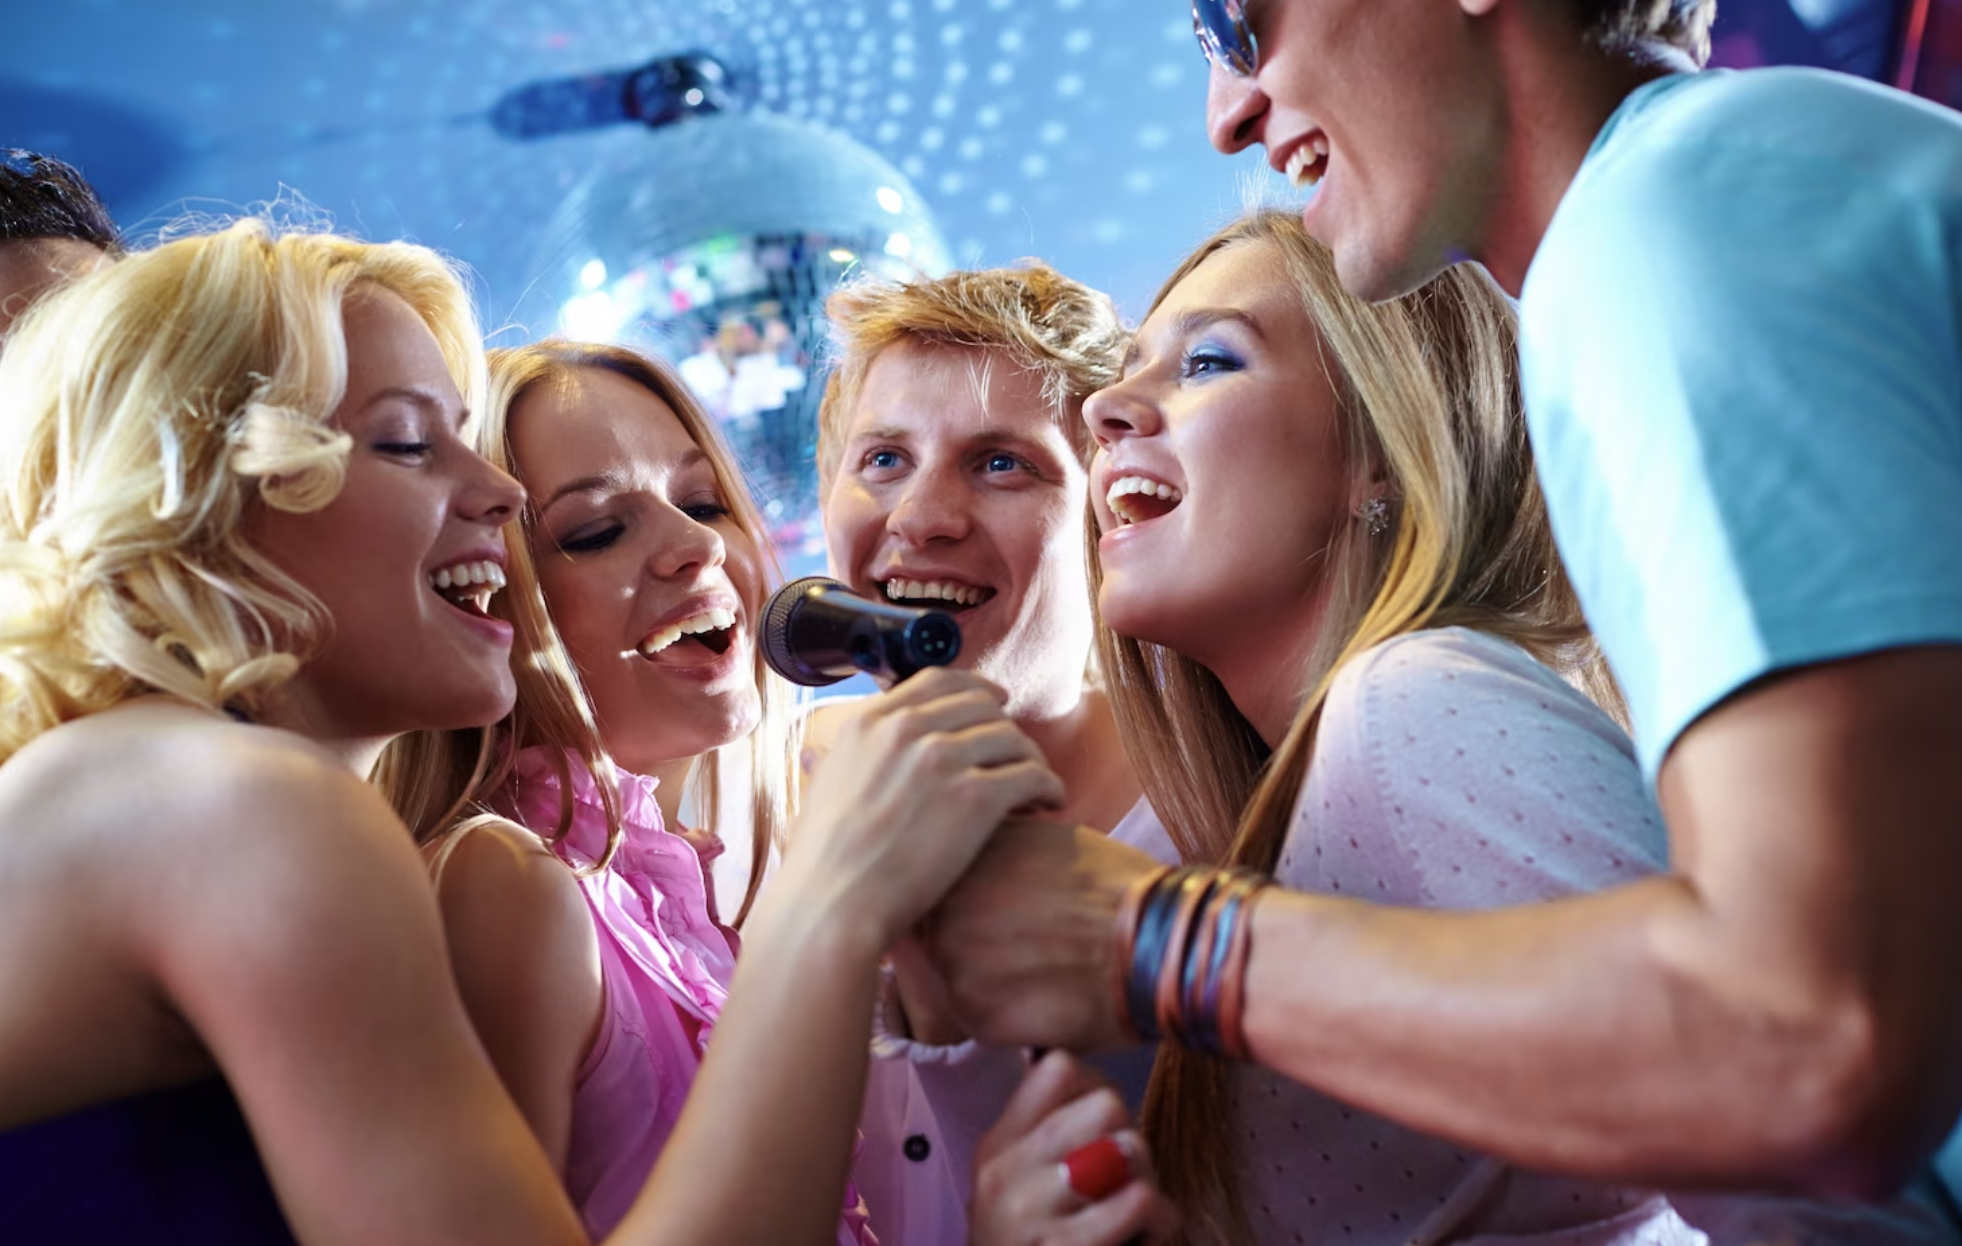 The Ultimate Guide to Throwing the Perfect College Party